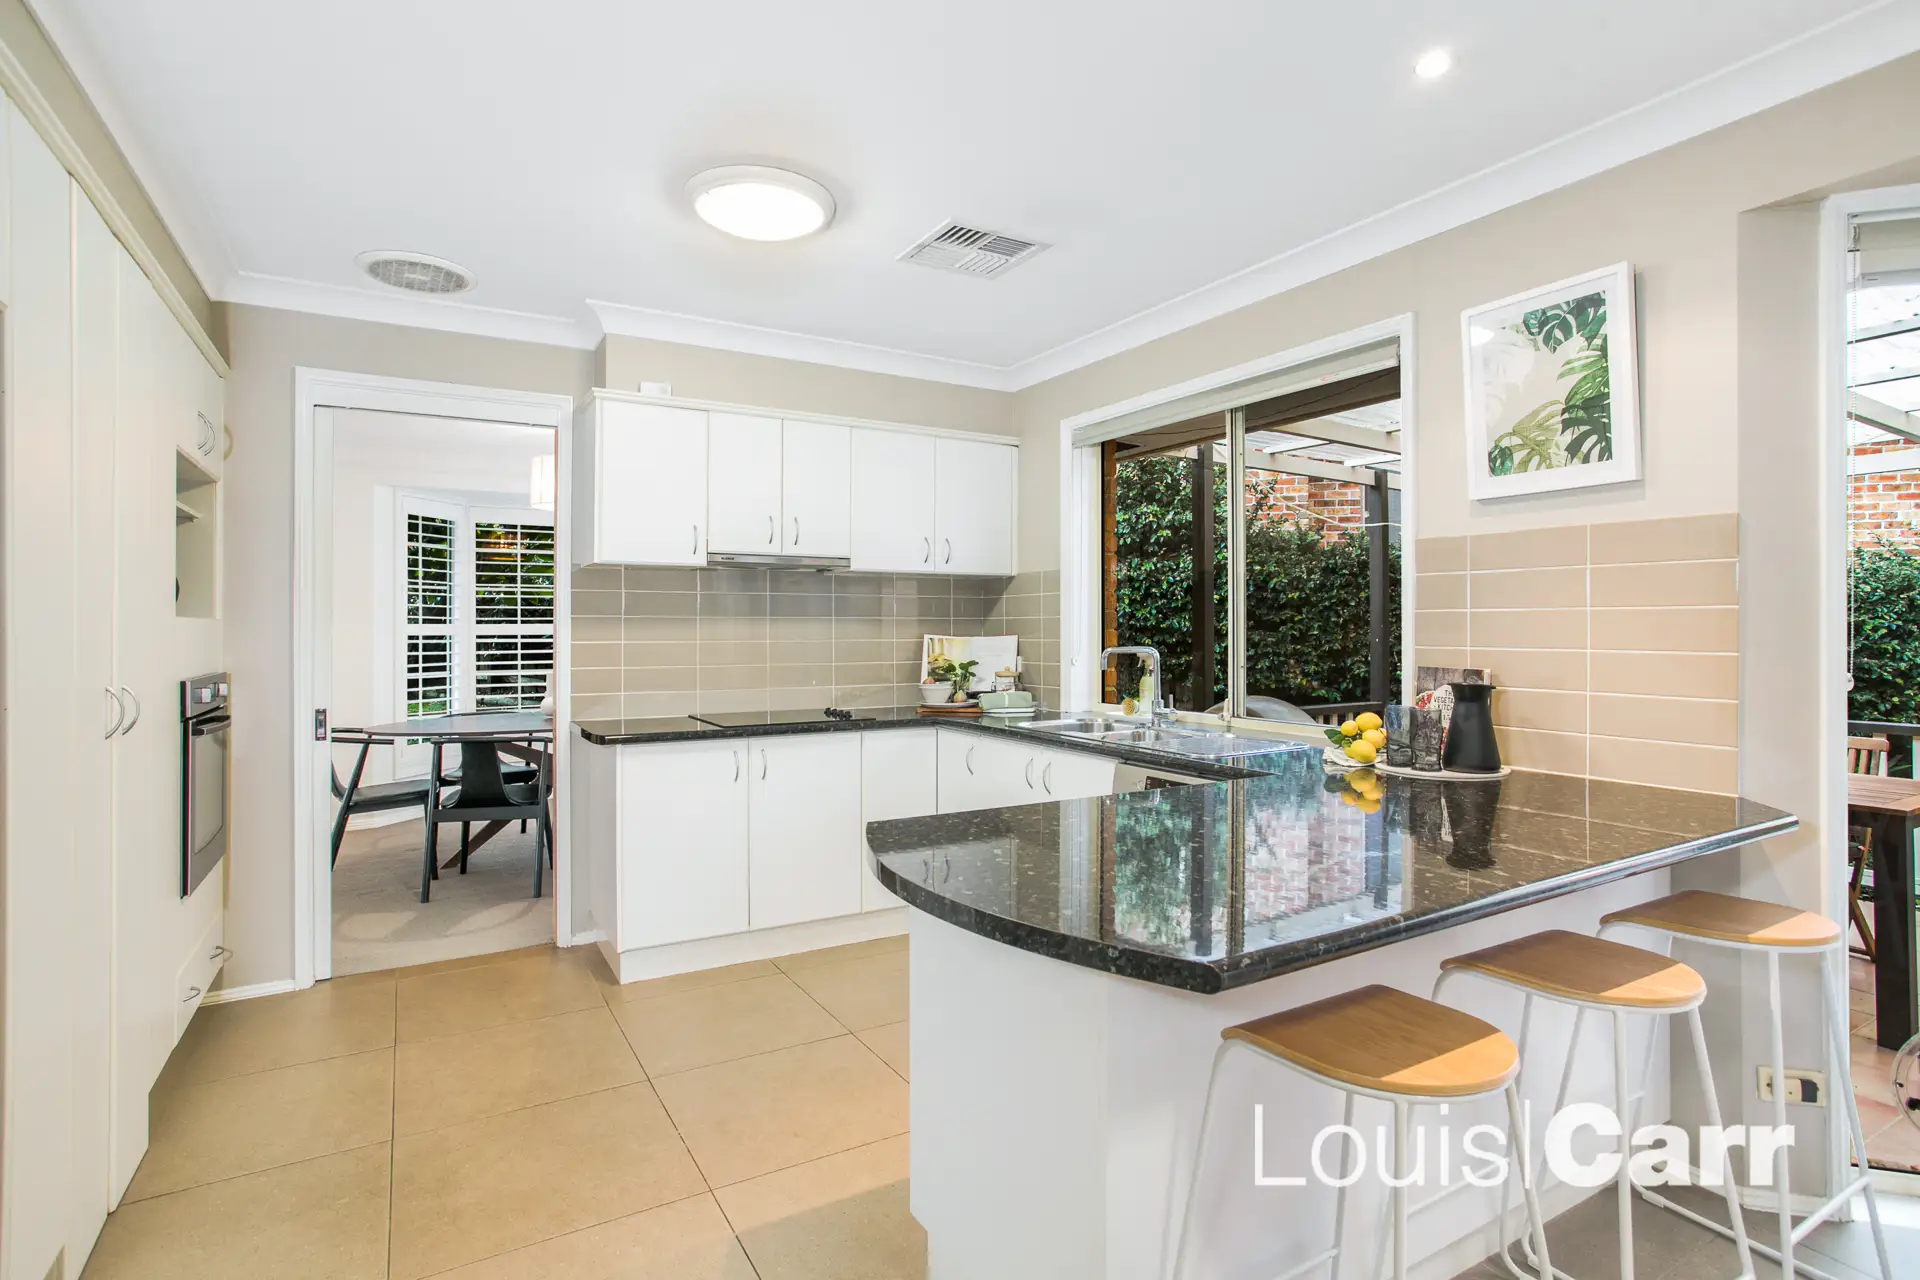 Photo #5: 18 Lyndhurst Court, West Pennant Hills - Sold by Louis Carr Real Estate